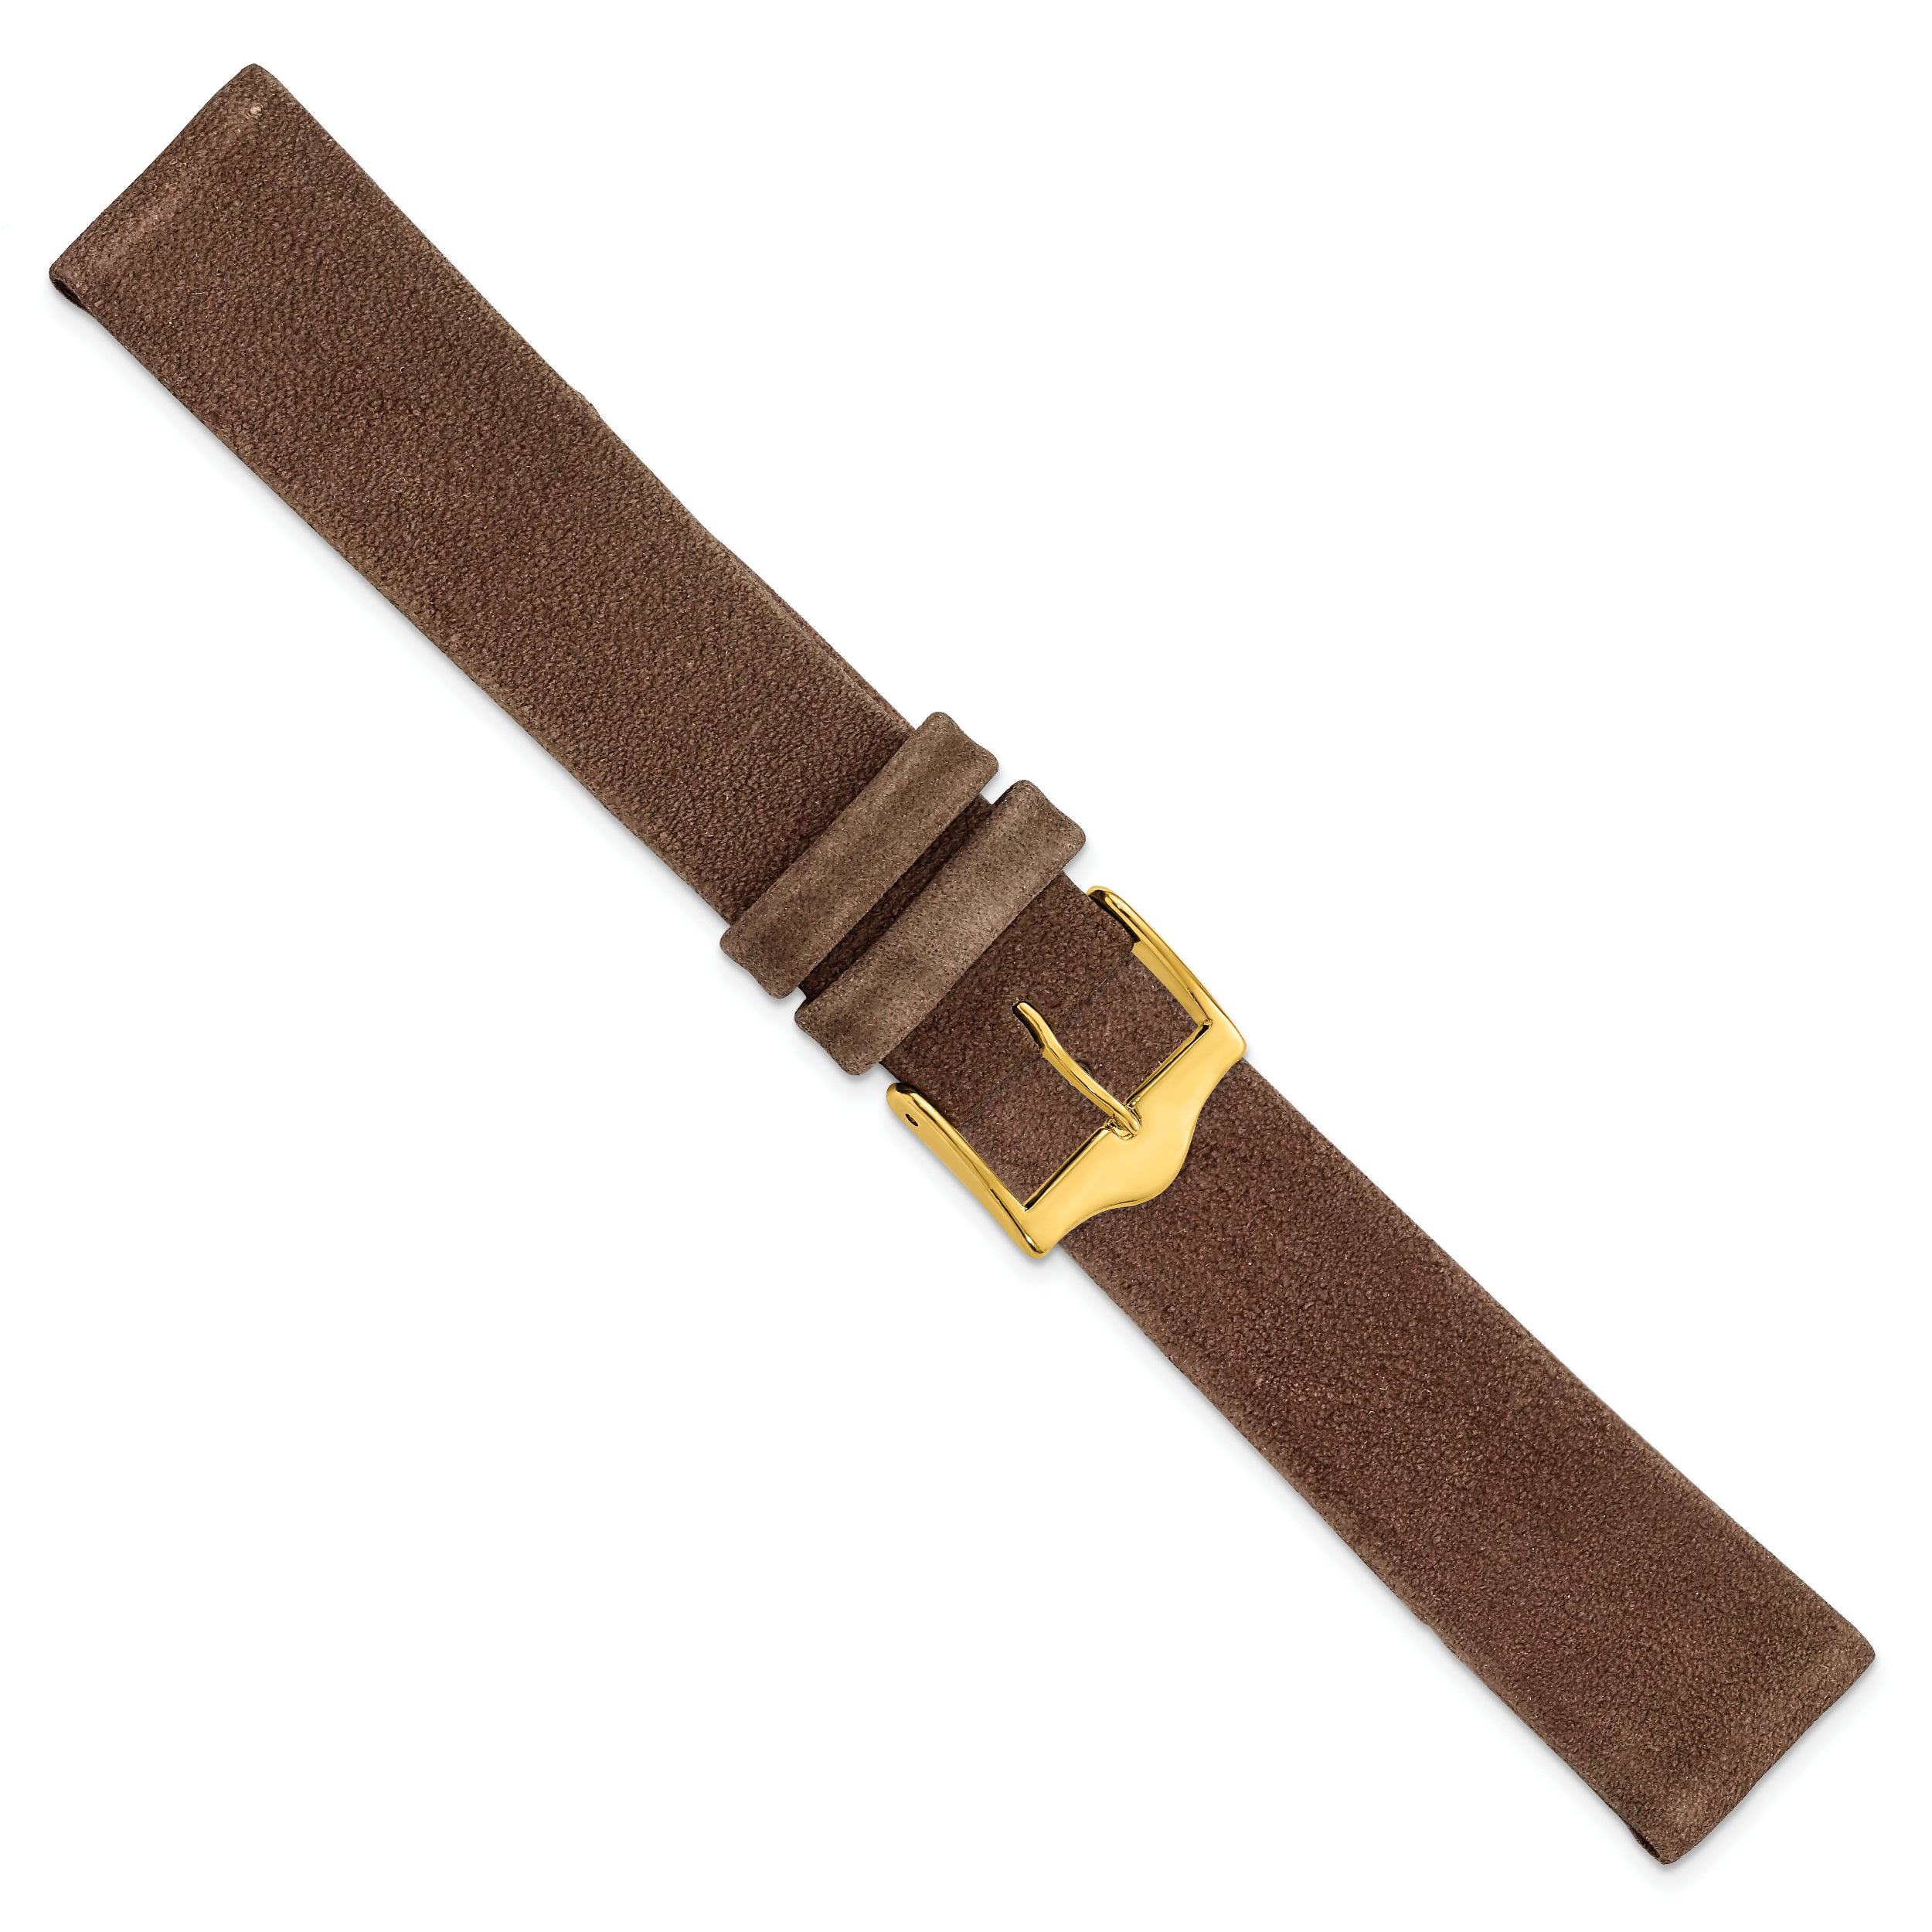 12mm Dark Brown Suede Flat Leather with Gold-tone Buckle 6.75 inch Watch Band